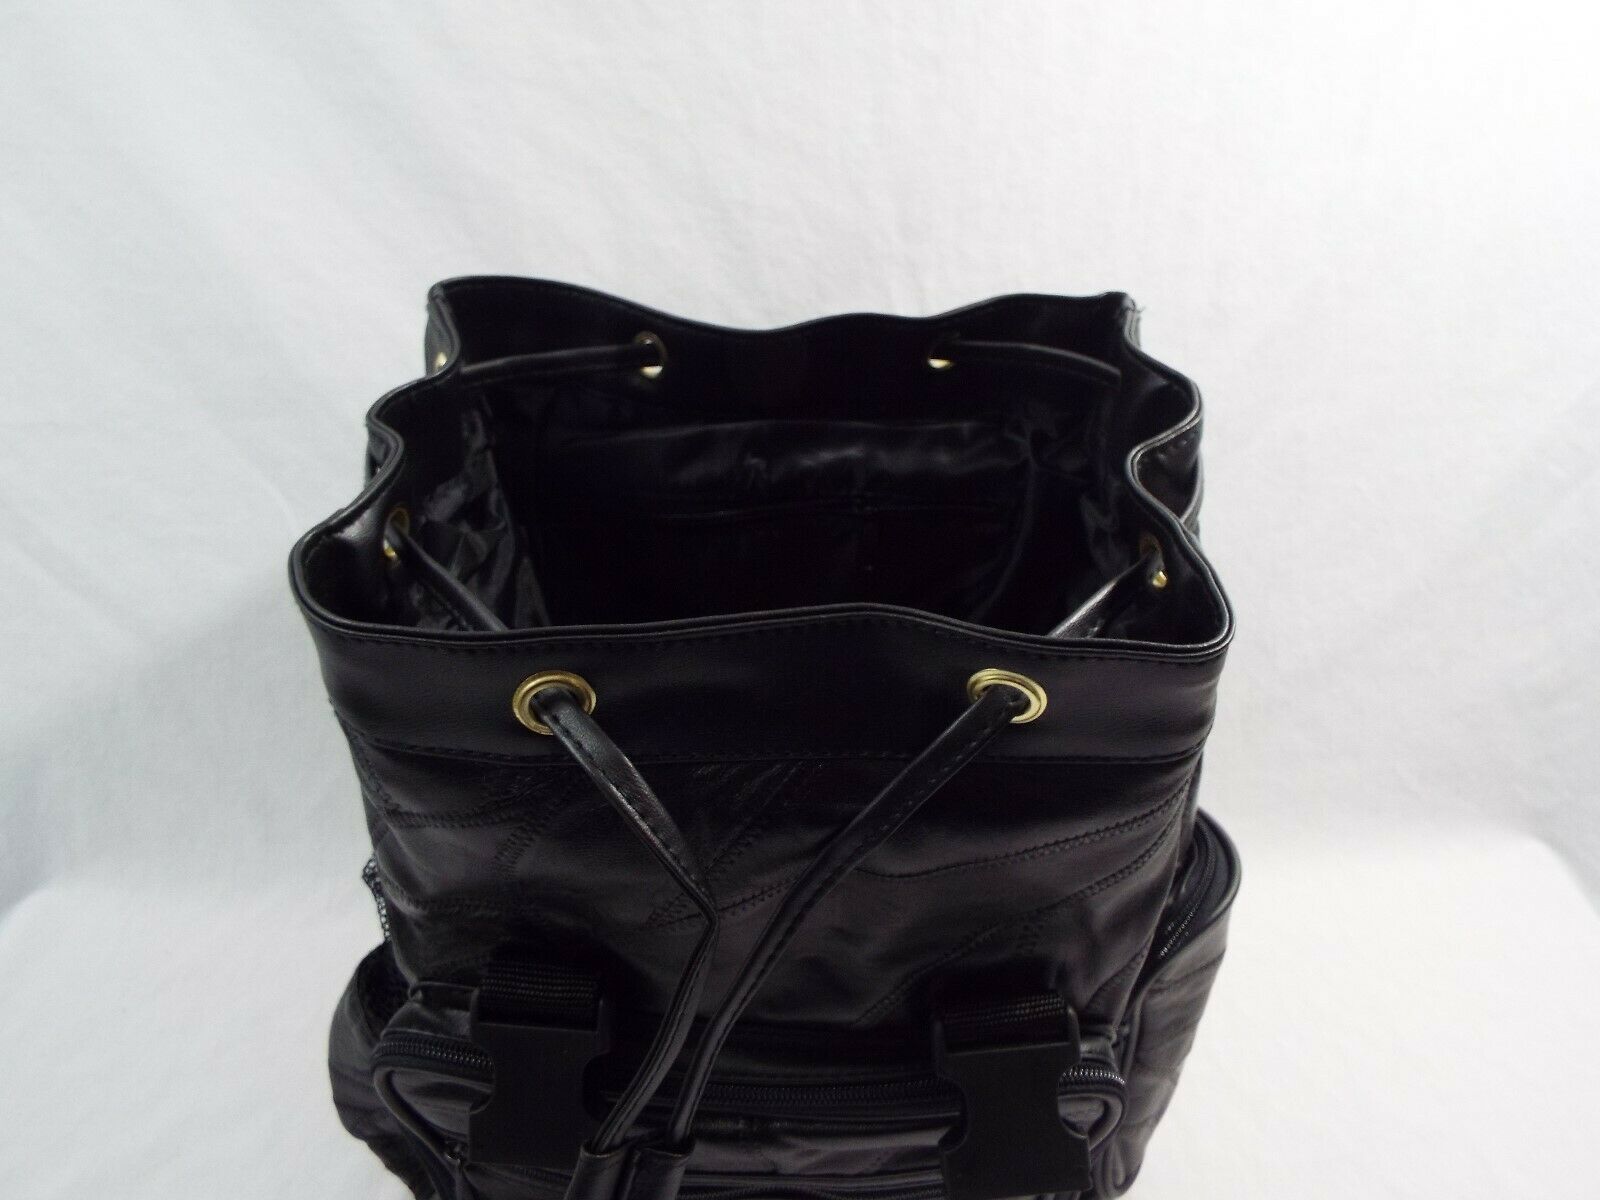 Embassy USA Buttery Soft Leather Black Backpack Zippers Pockets - Women&#39;s Bags & Handbags